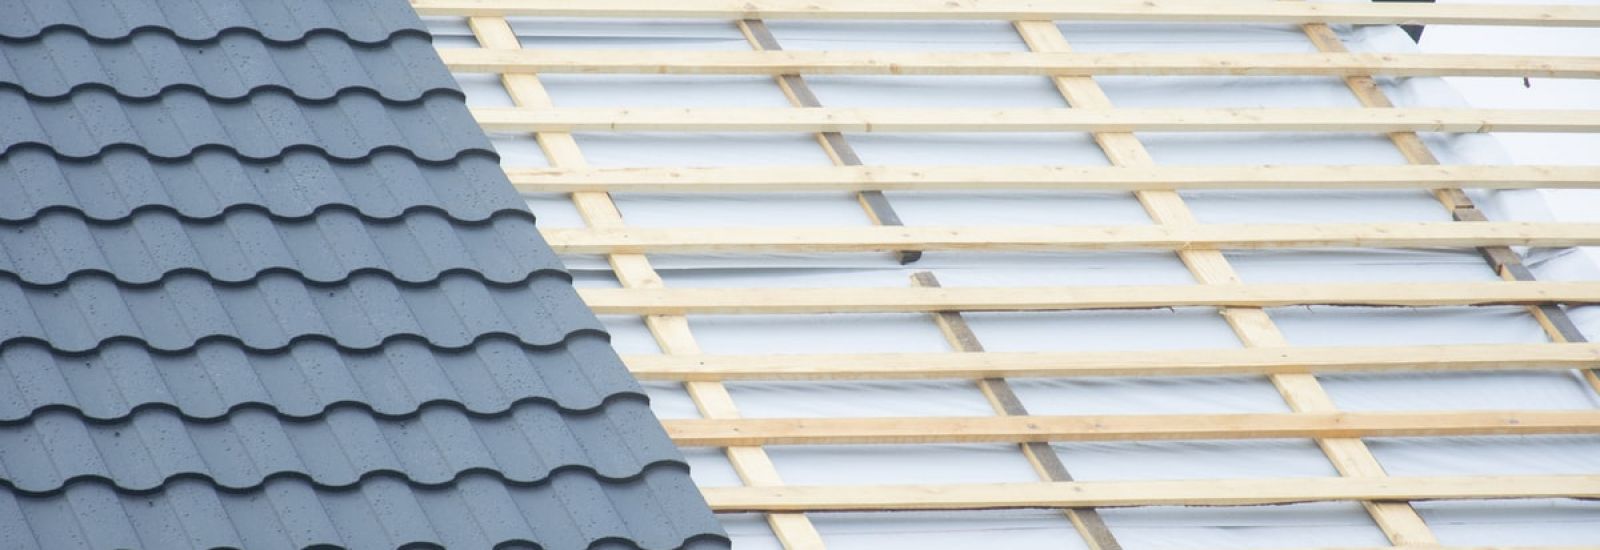 DIY Roof Replacement vs. Professional Roofing Replacement